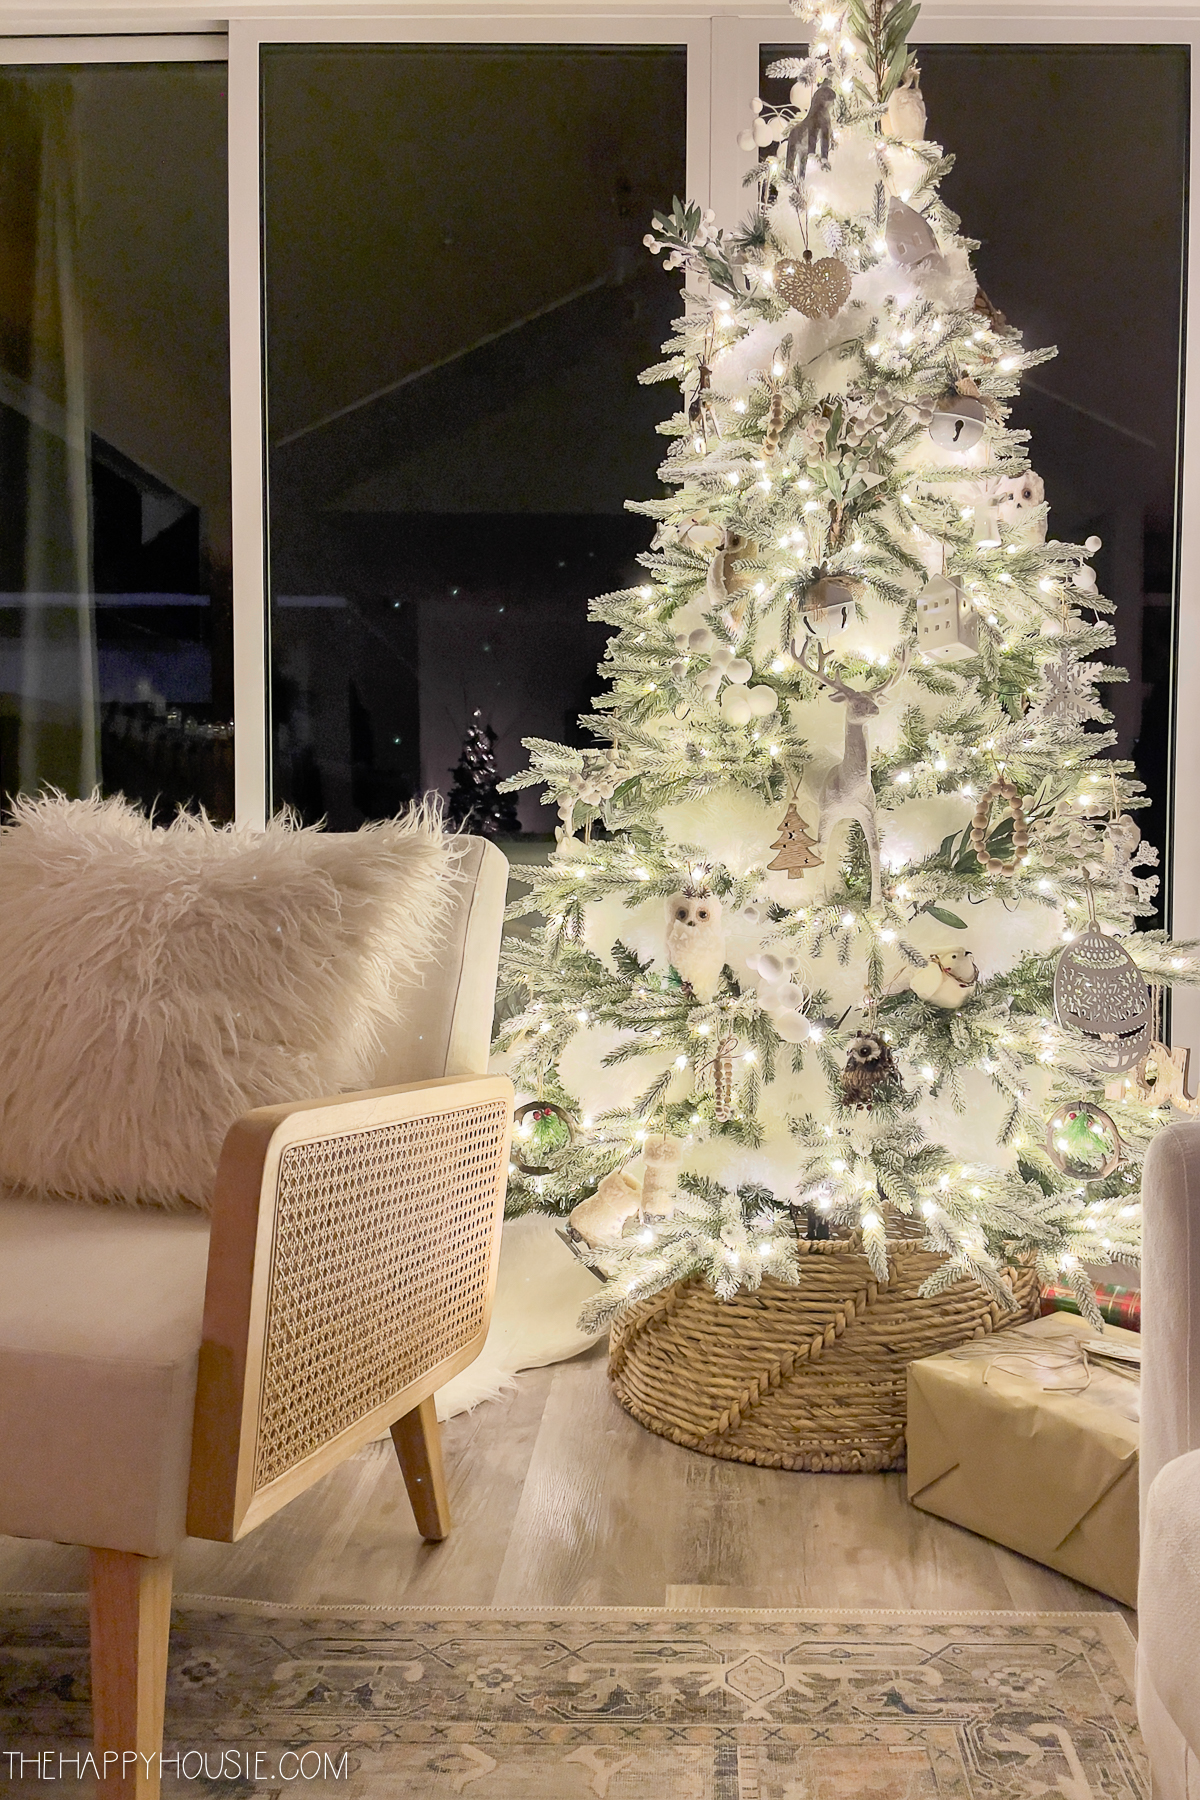 a light and white Christmas tree at night in a living room